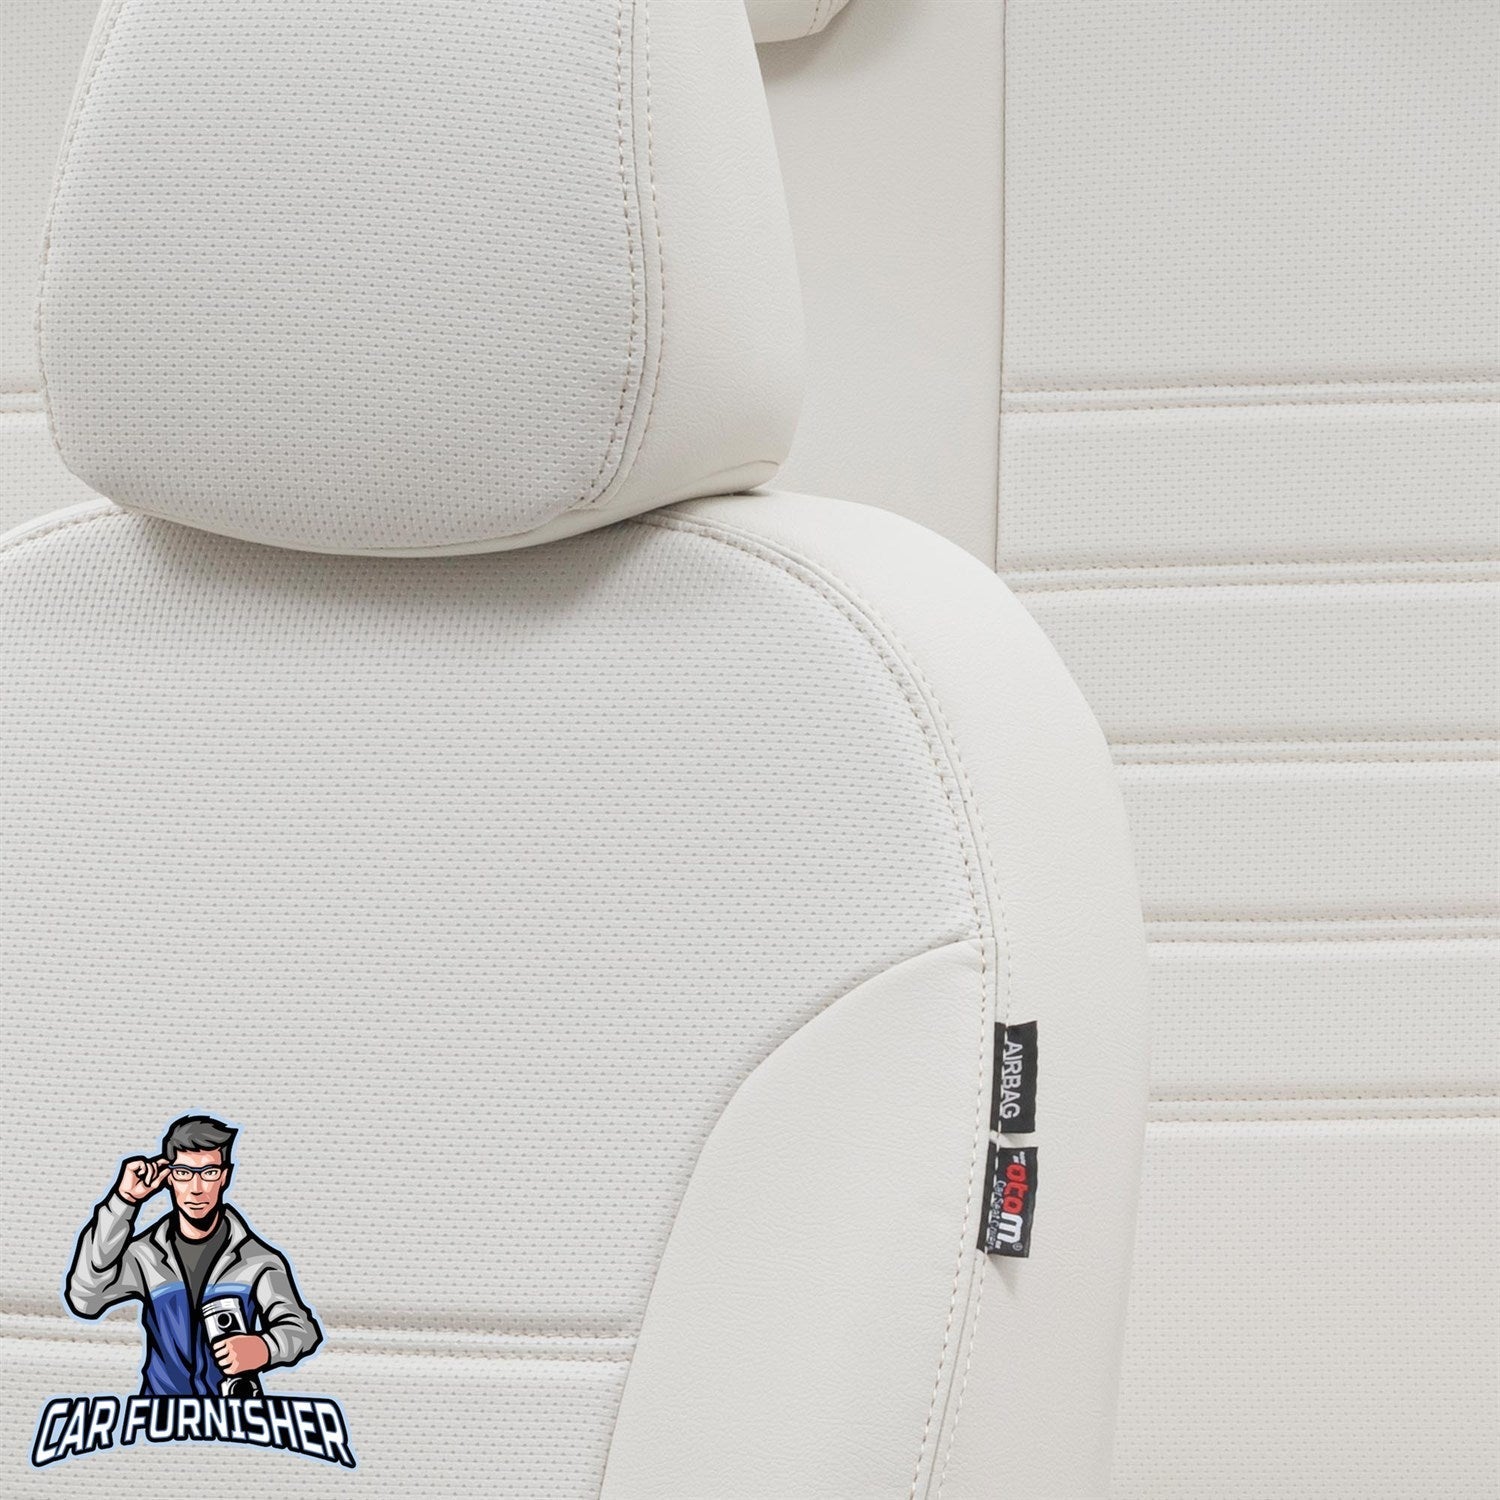 Citroen C-Elysee Seat Covers New York Leather Design Ivory Leather